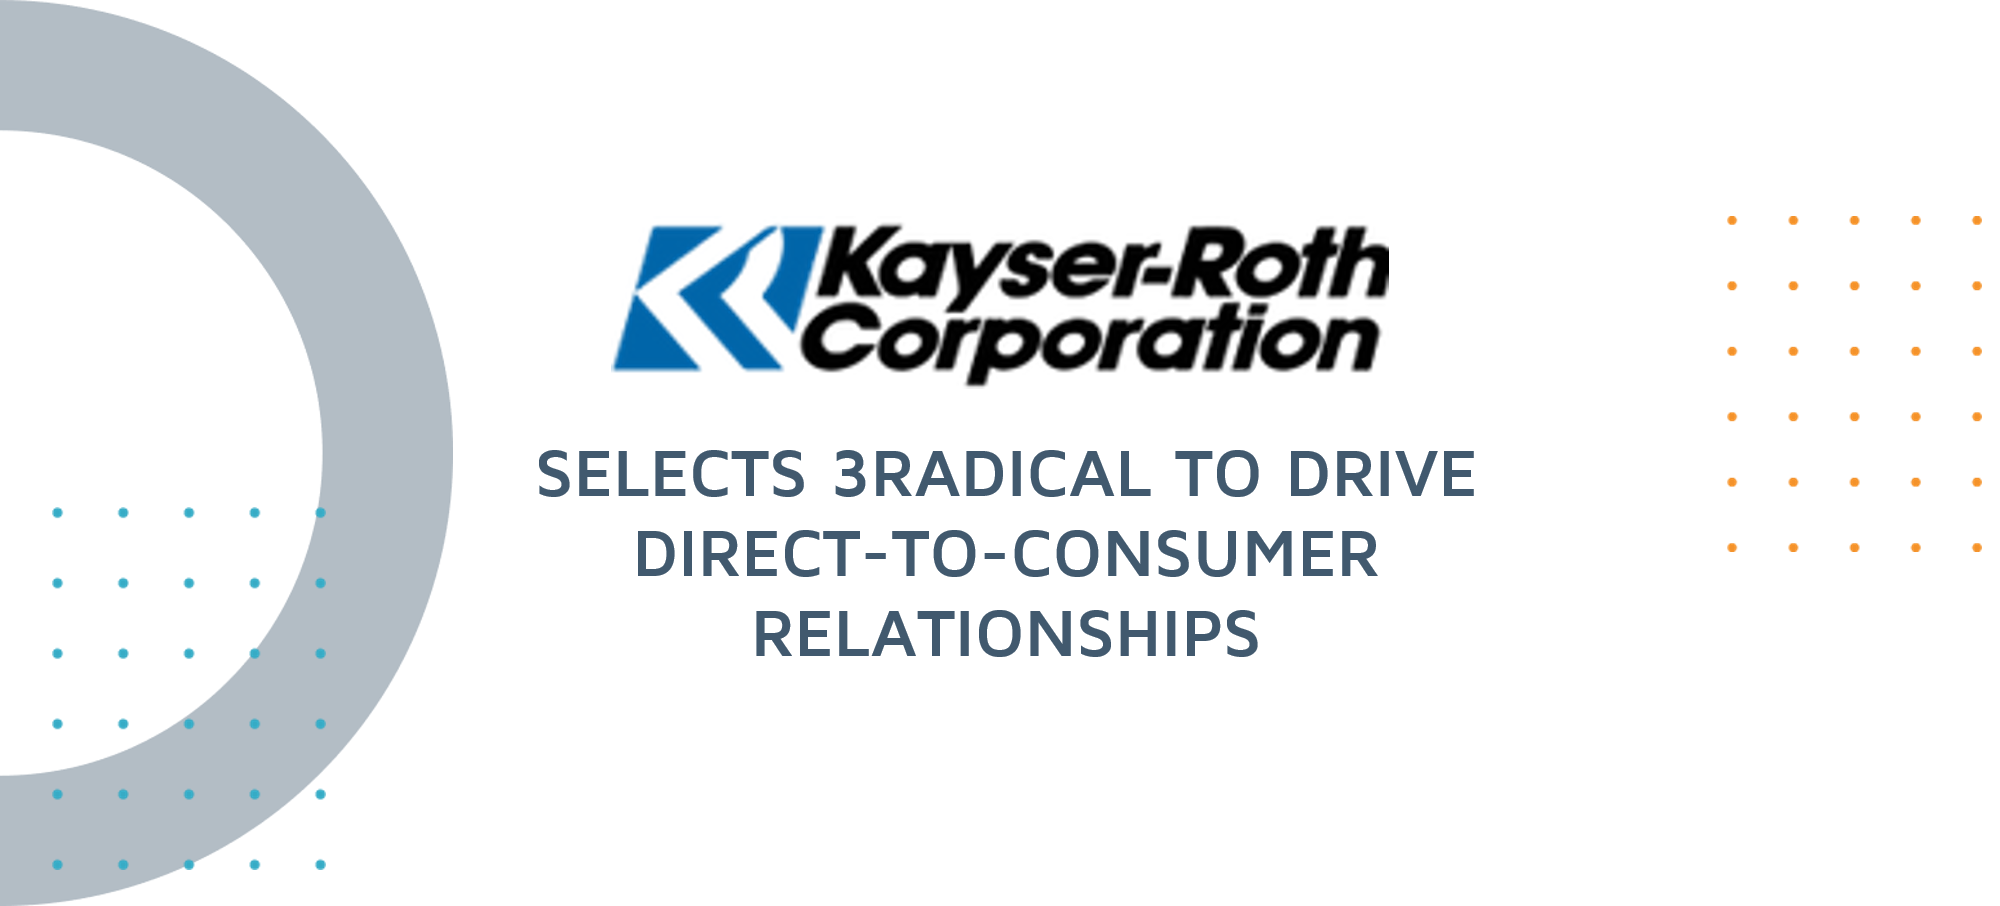 3radical Partners with Kayser-Roth Corp to Drive Direct-to-Consumer Relationships